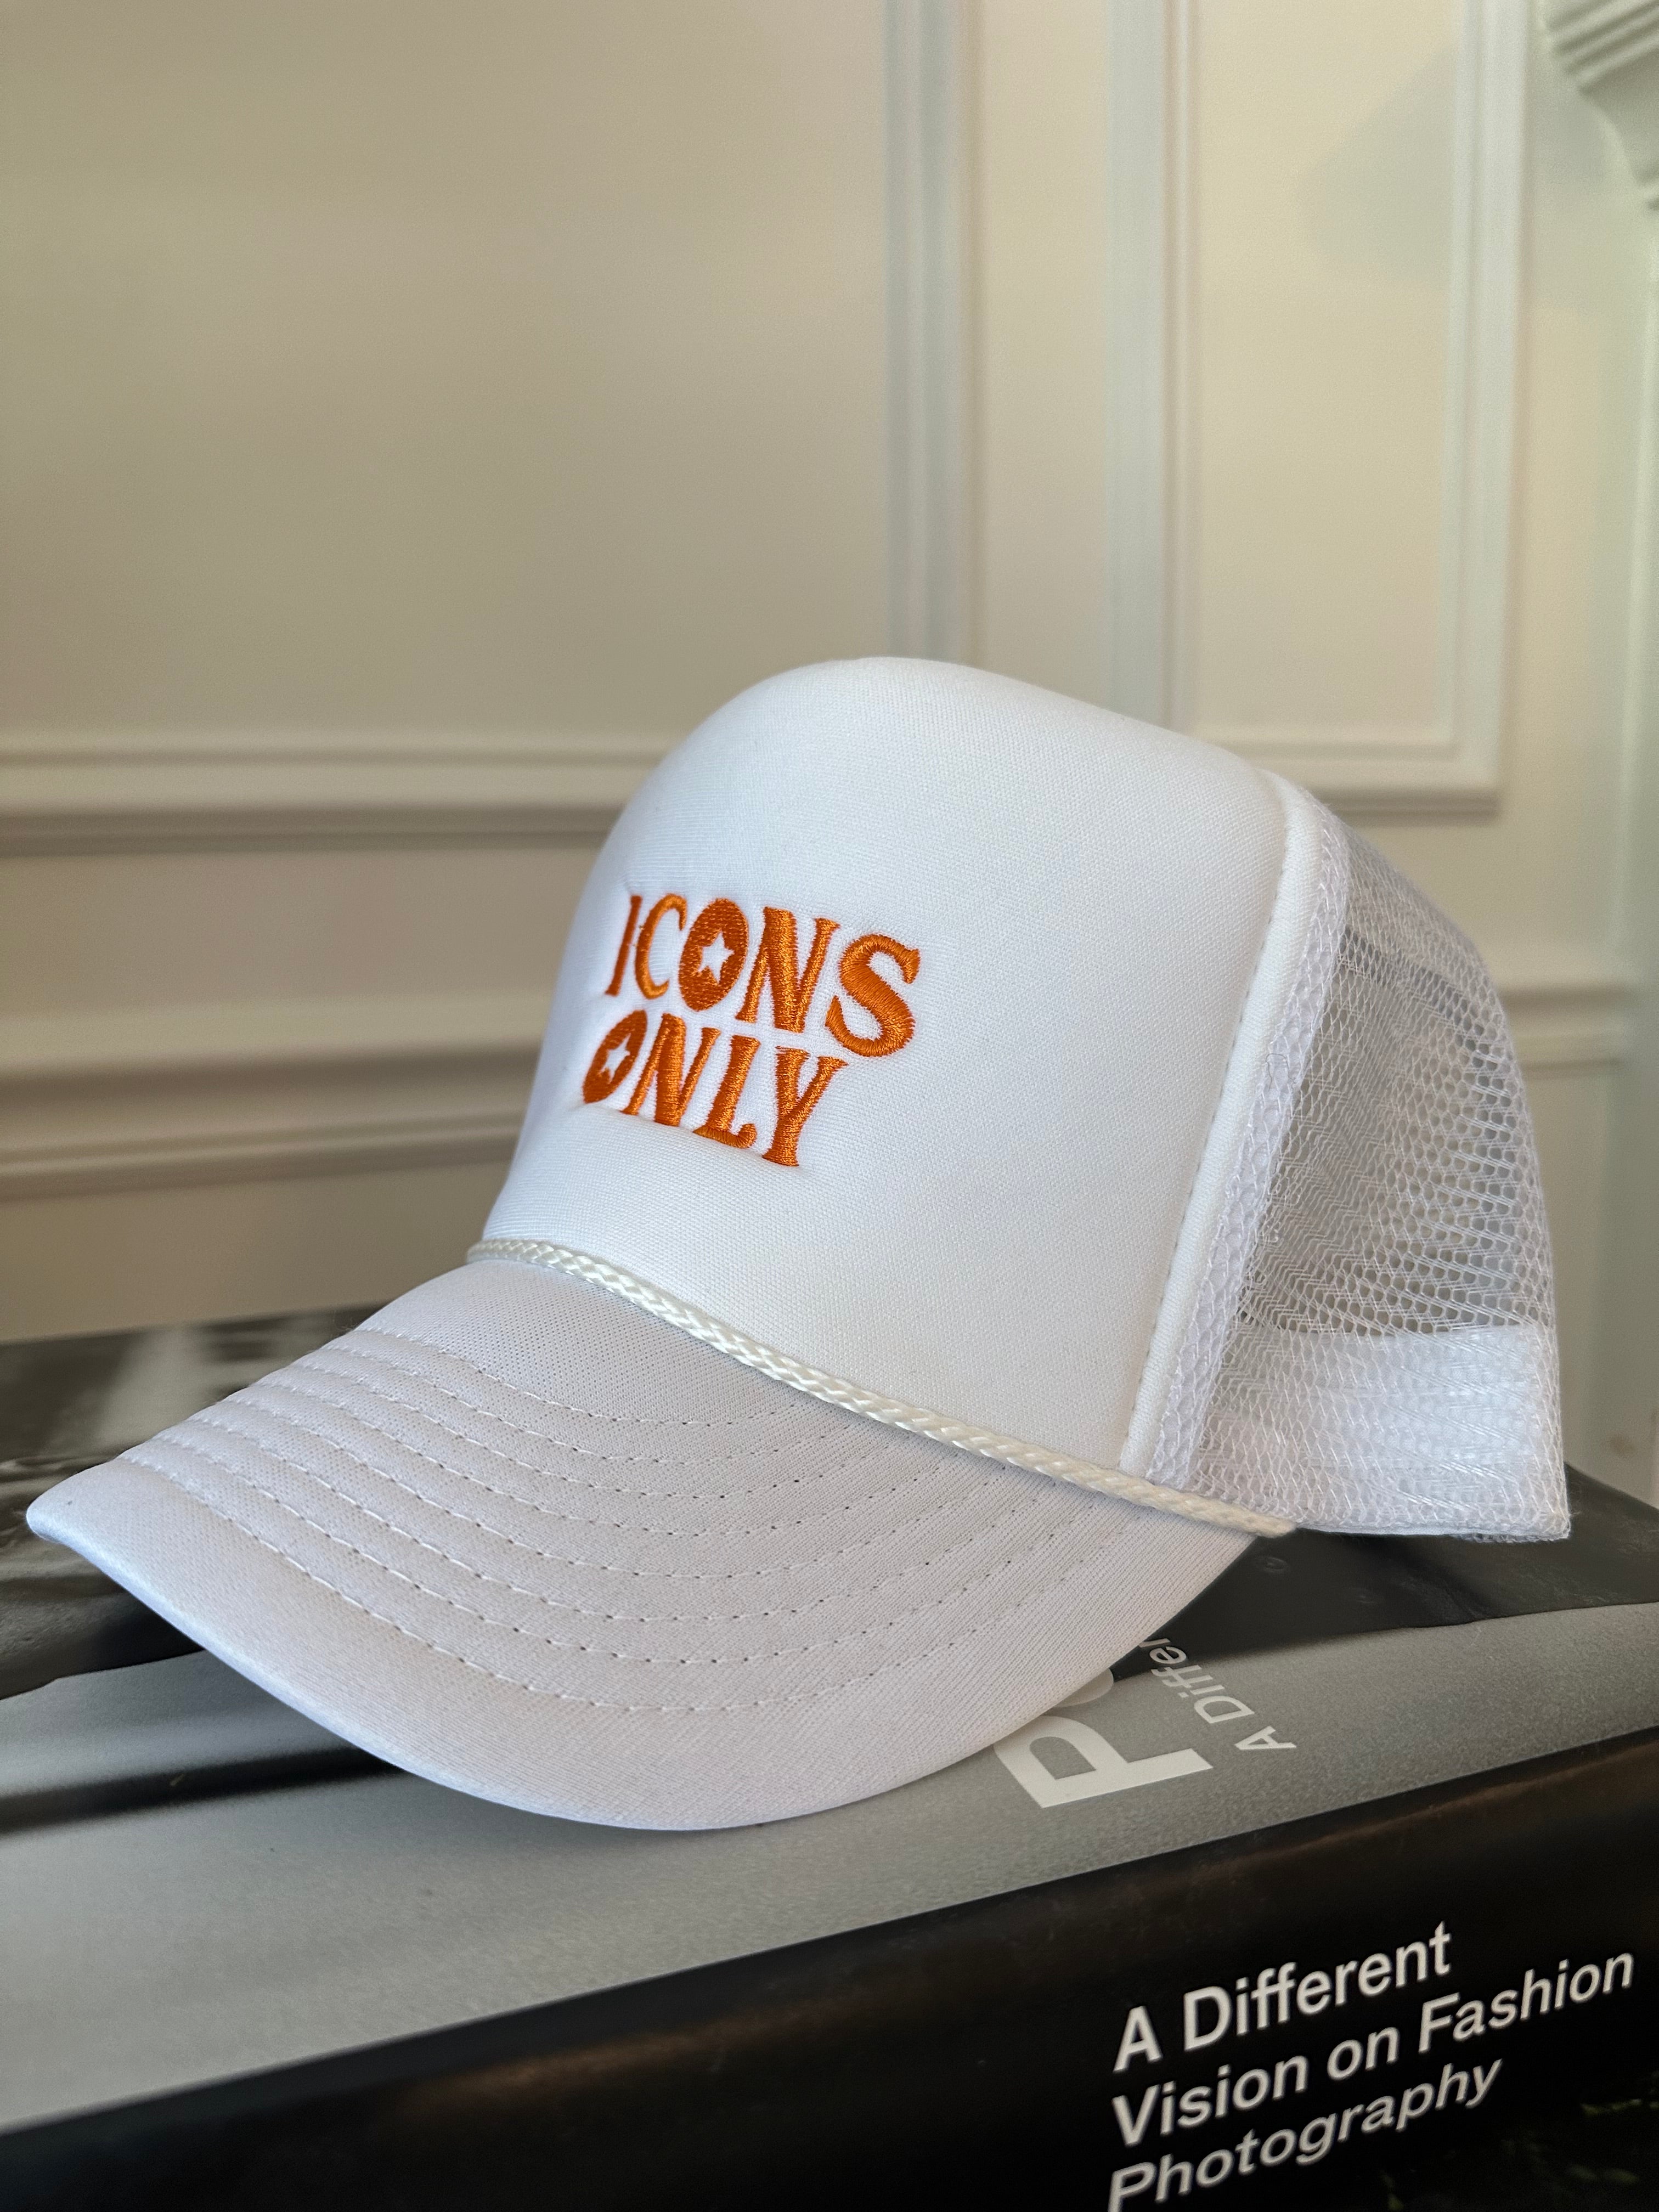 Icons Only Hat- Tennessee